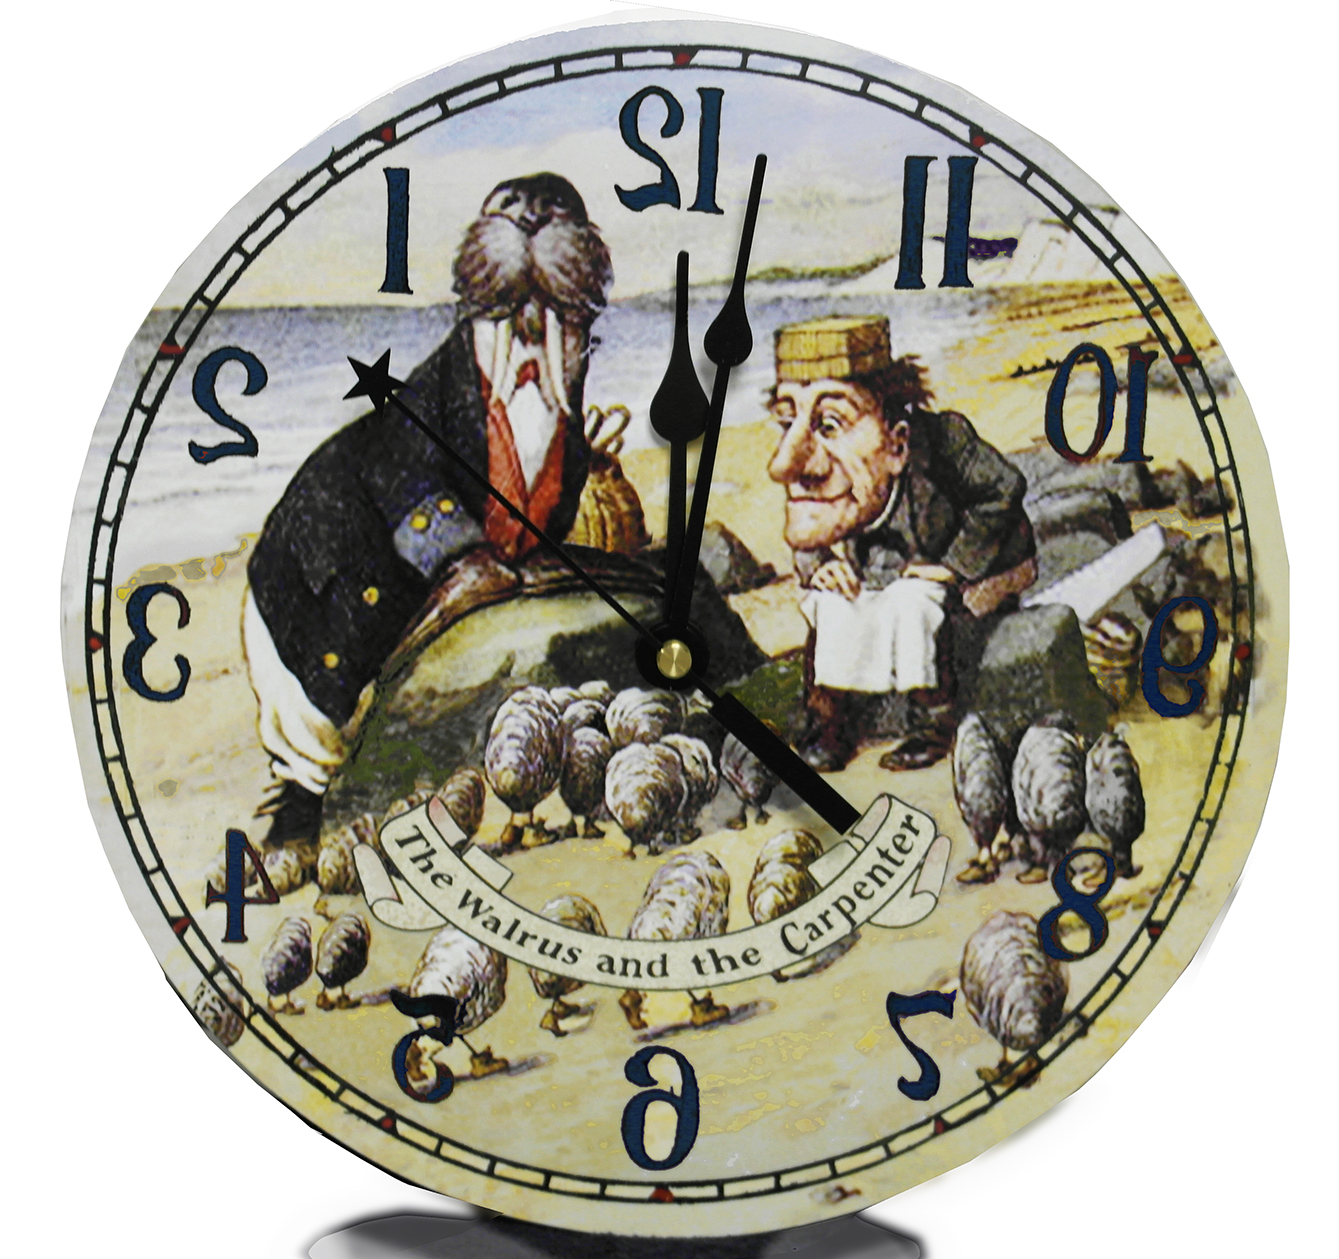 Walrus and Carpenter Clock, 3 sizes $36.00 to $52.00 (COPY)